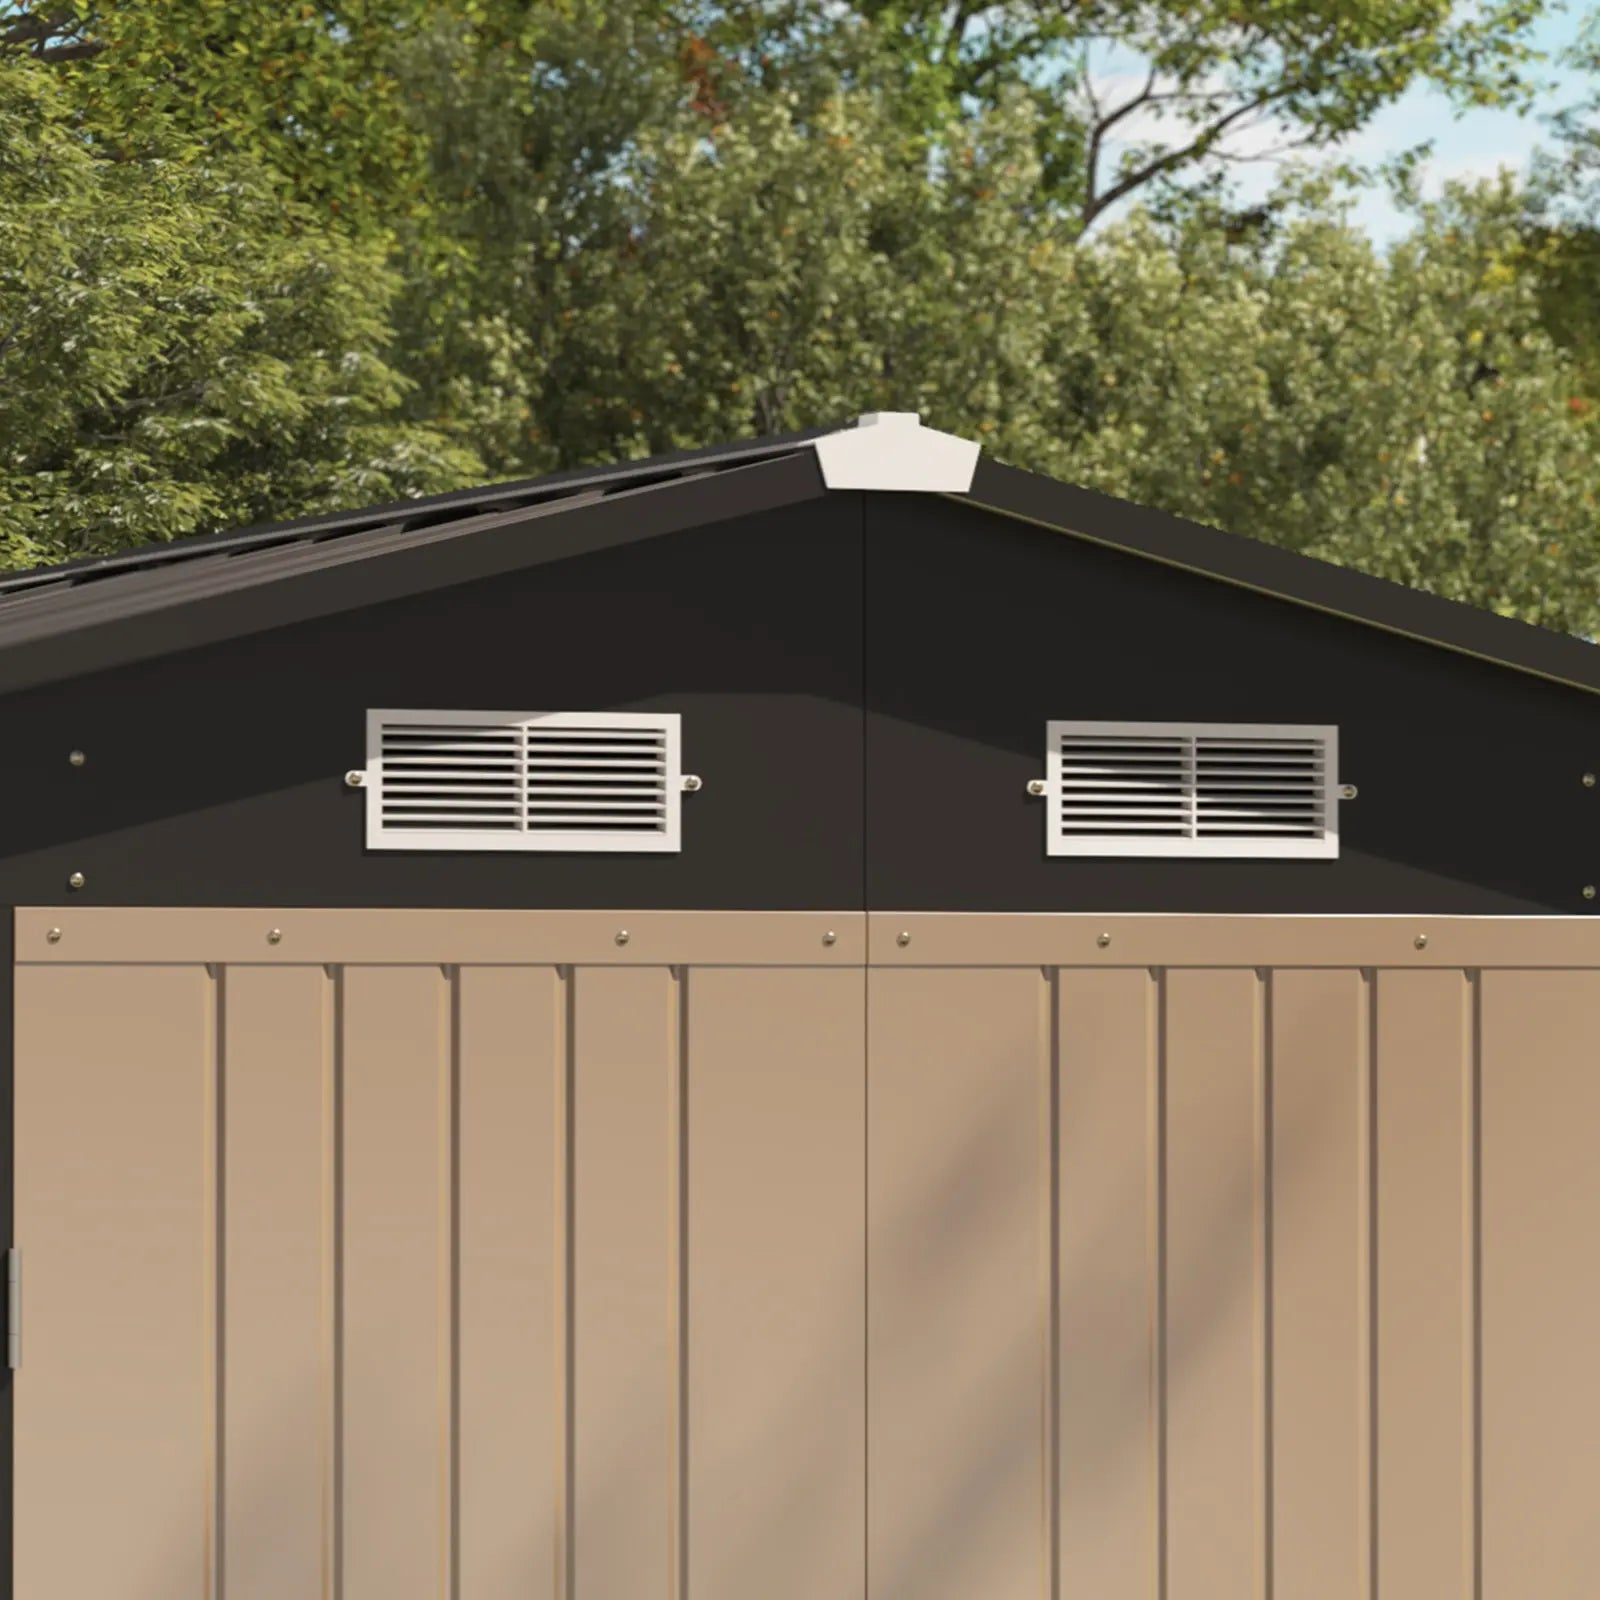 Patiowell 8x12 Metal Shed-Air Vents